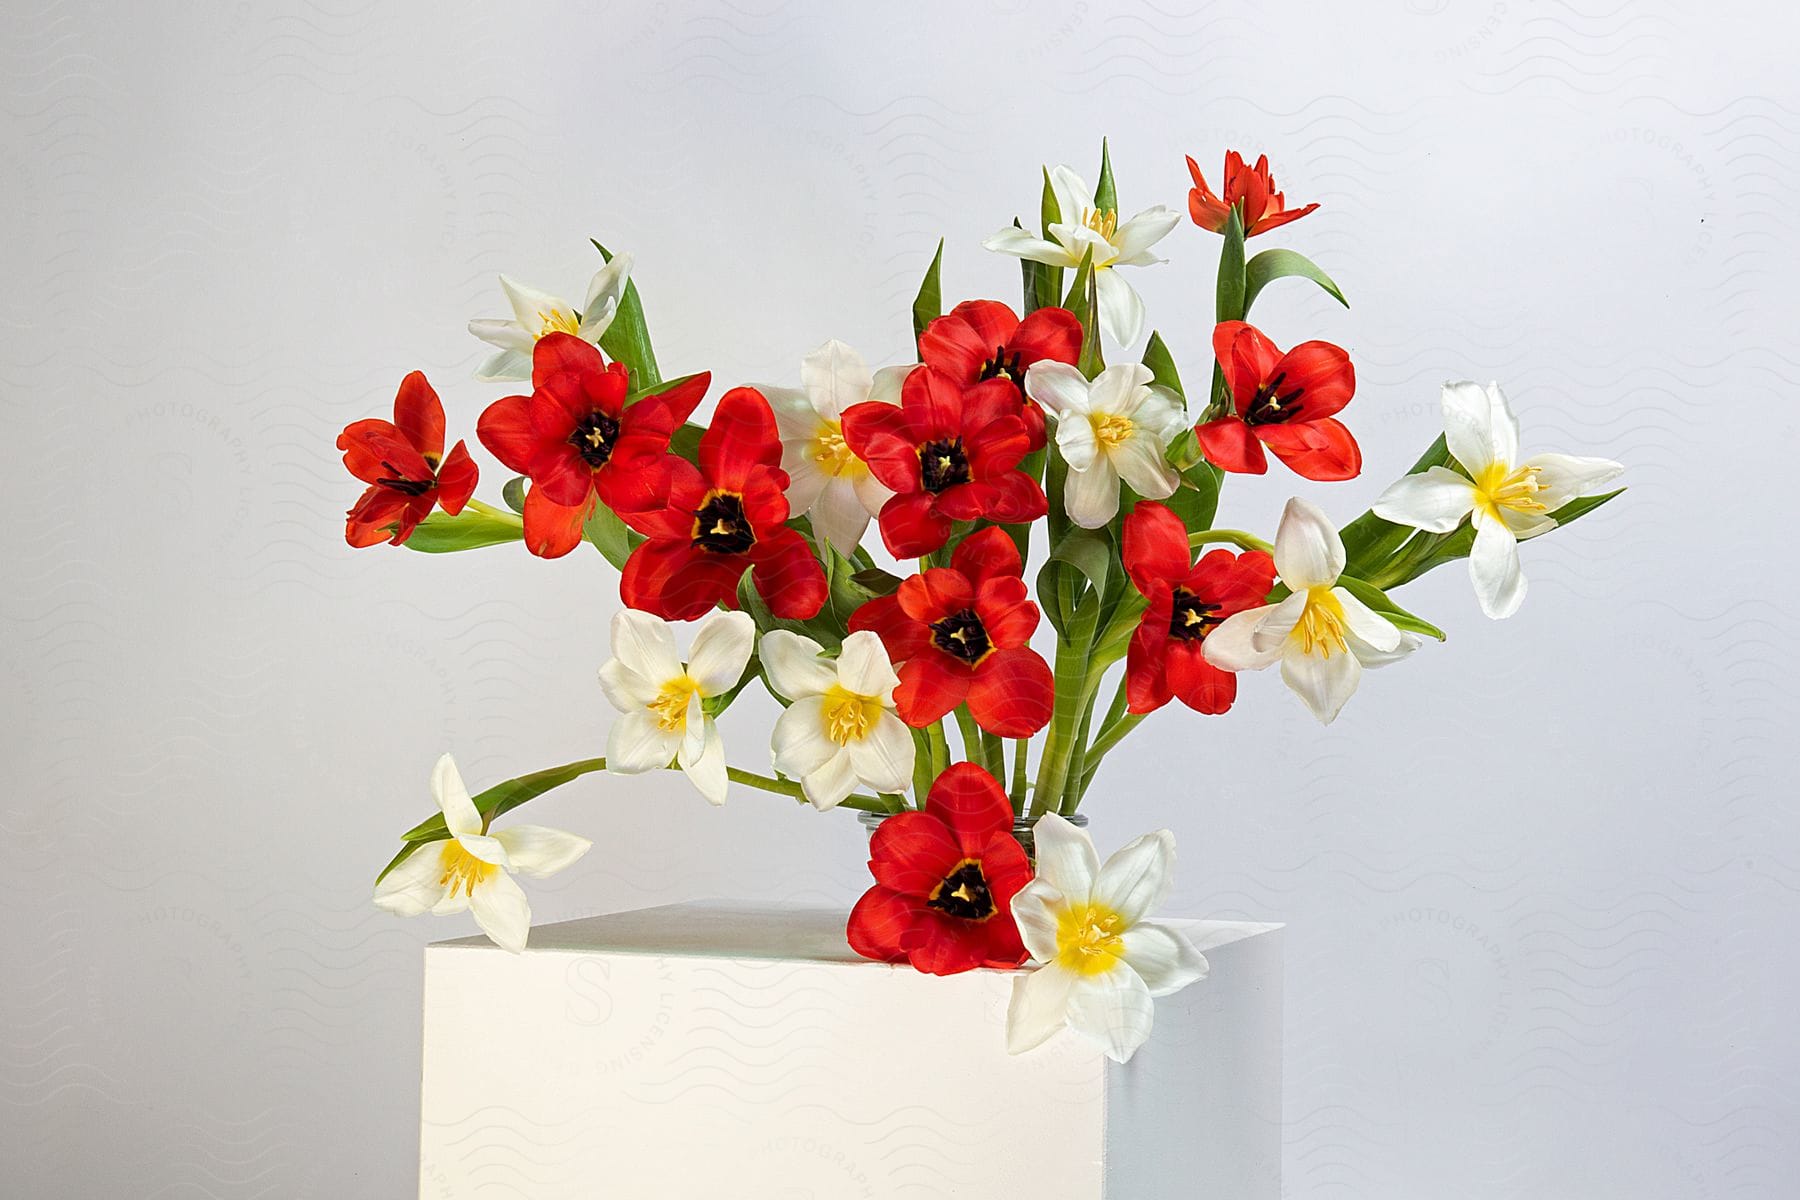 White vase with flowers of white and red colors on a white background